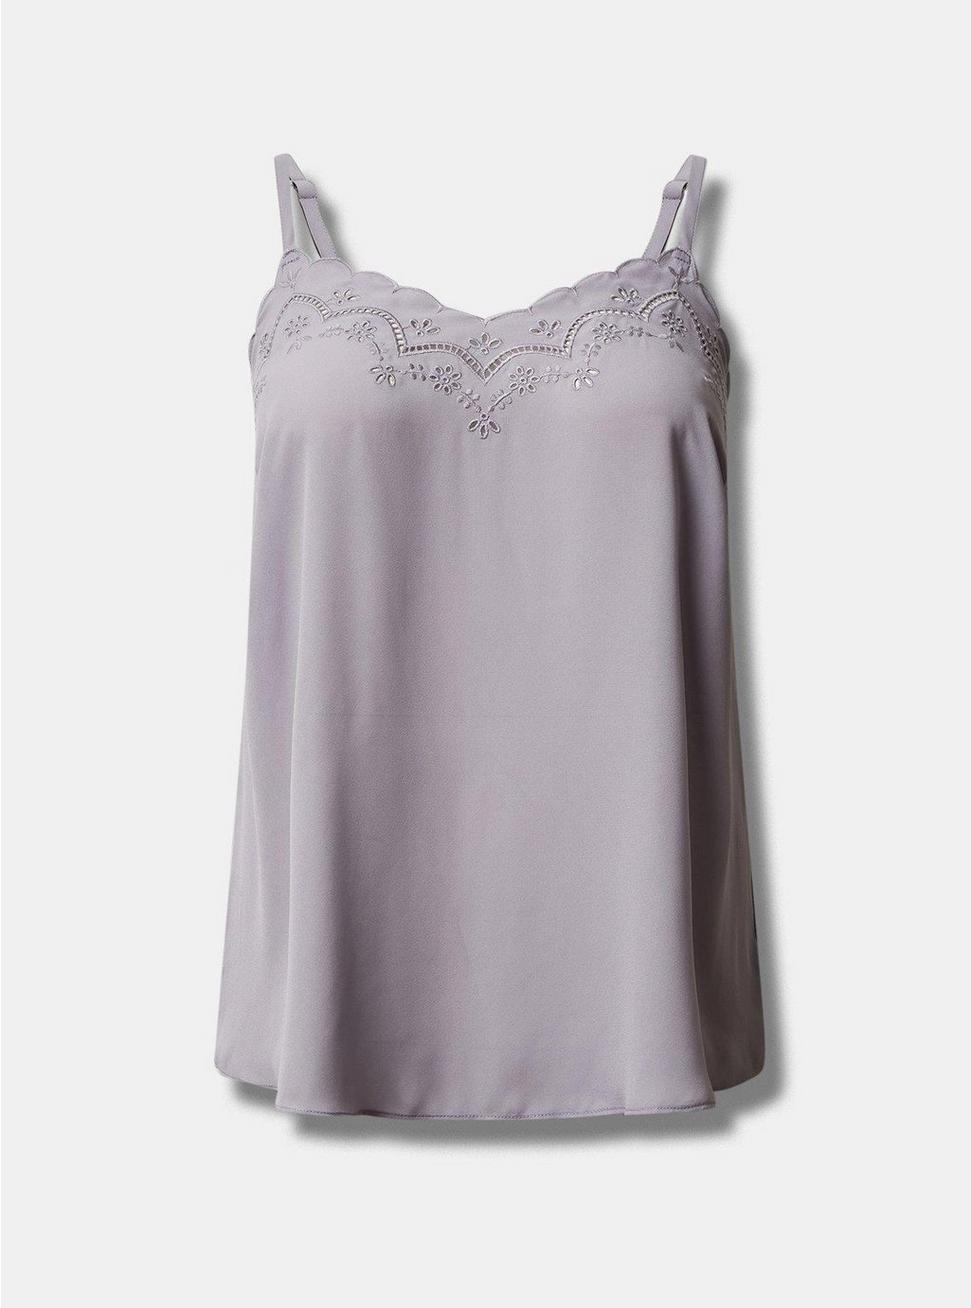 Sophie Georgette Embroidered Cami, LILAC GRAY, hi-res